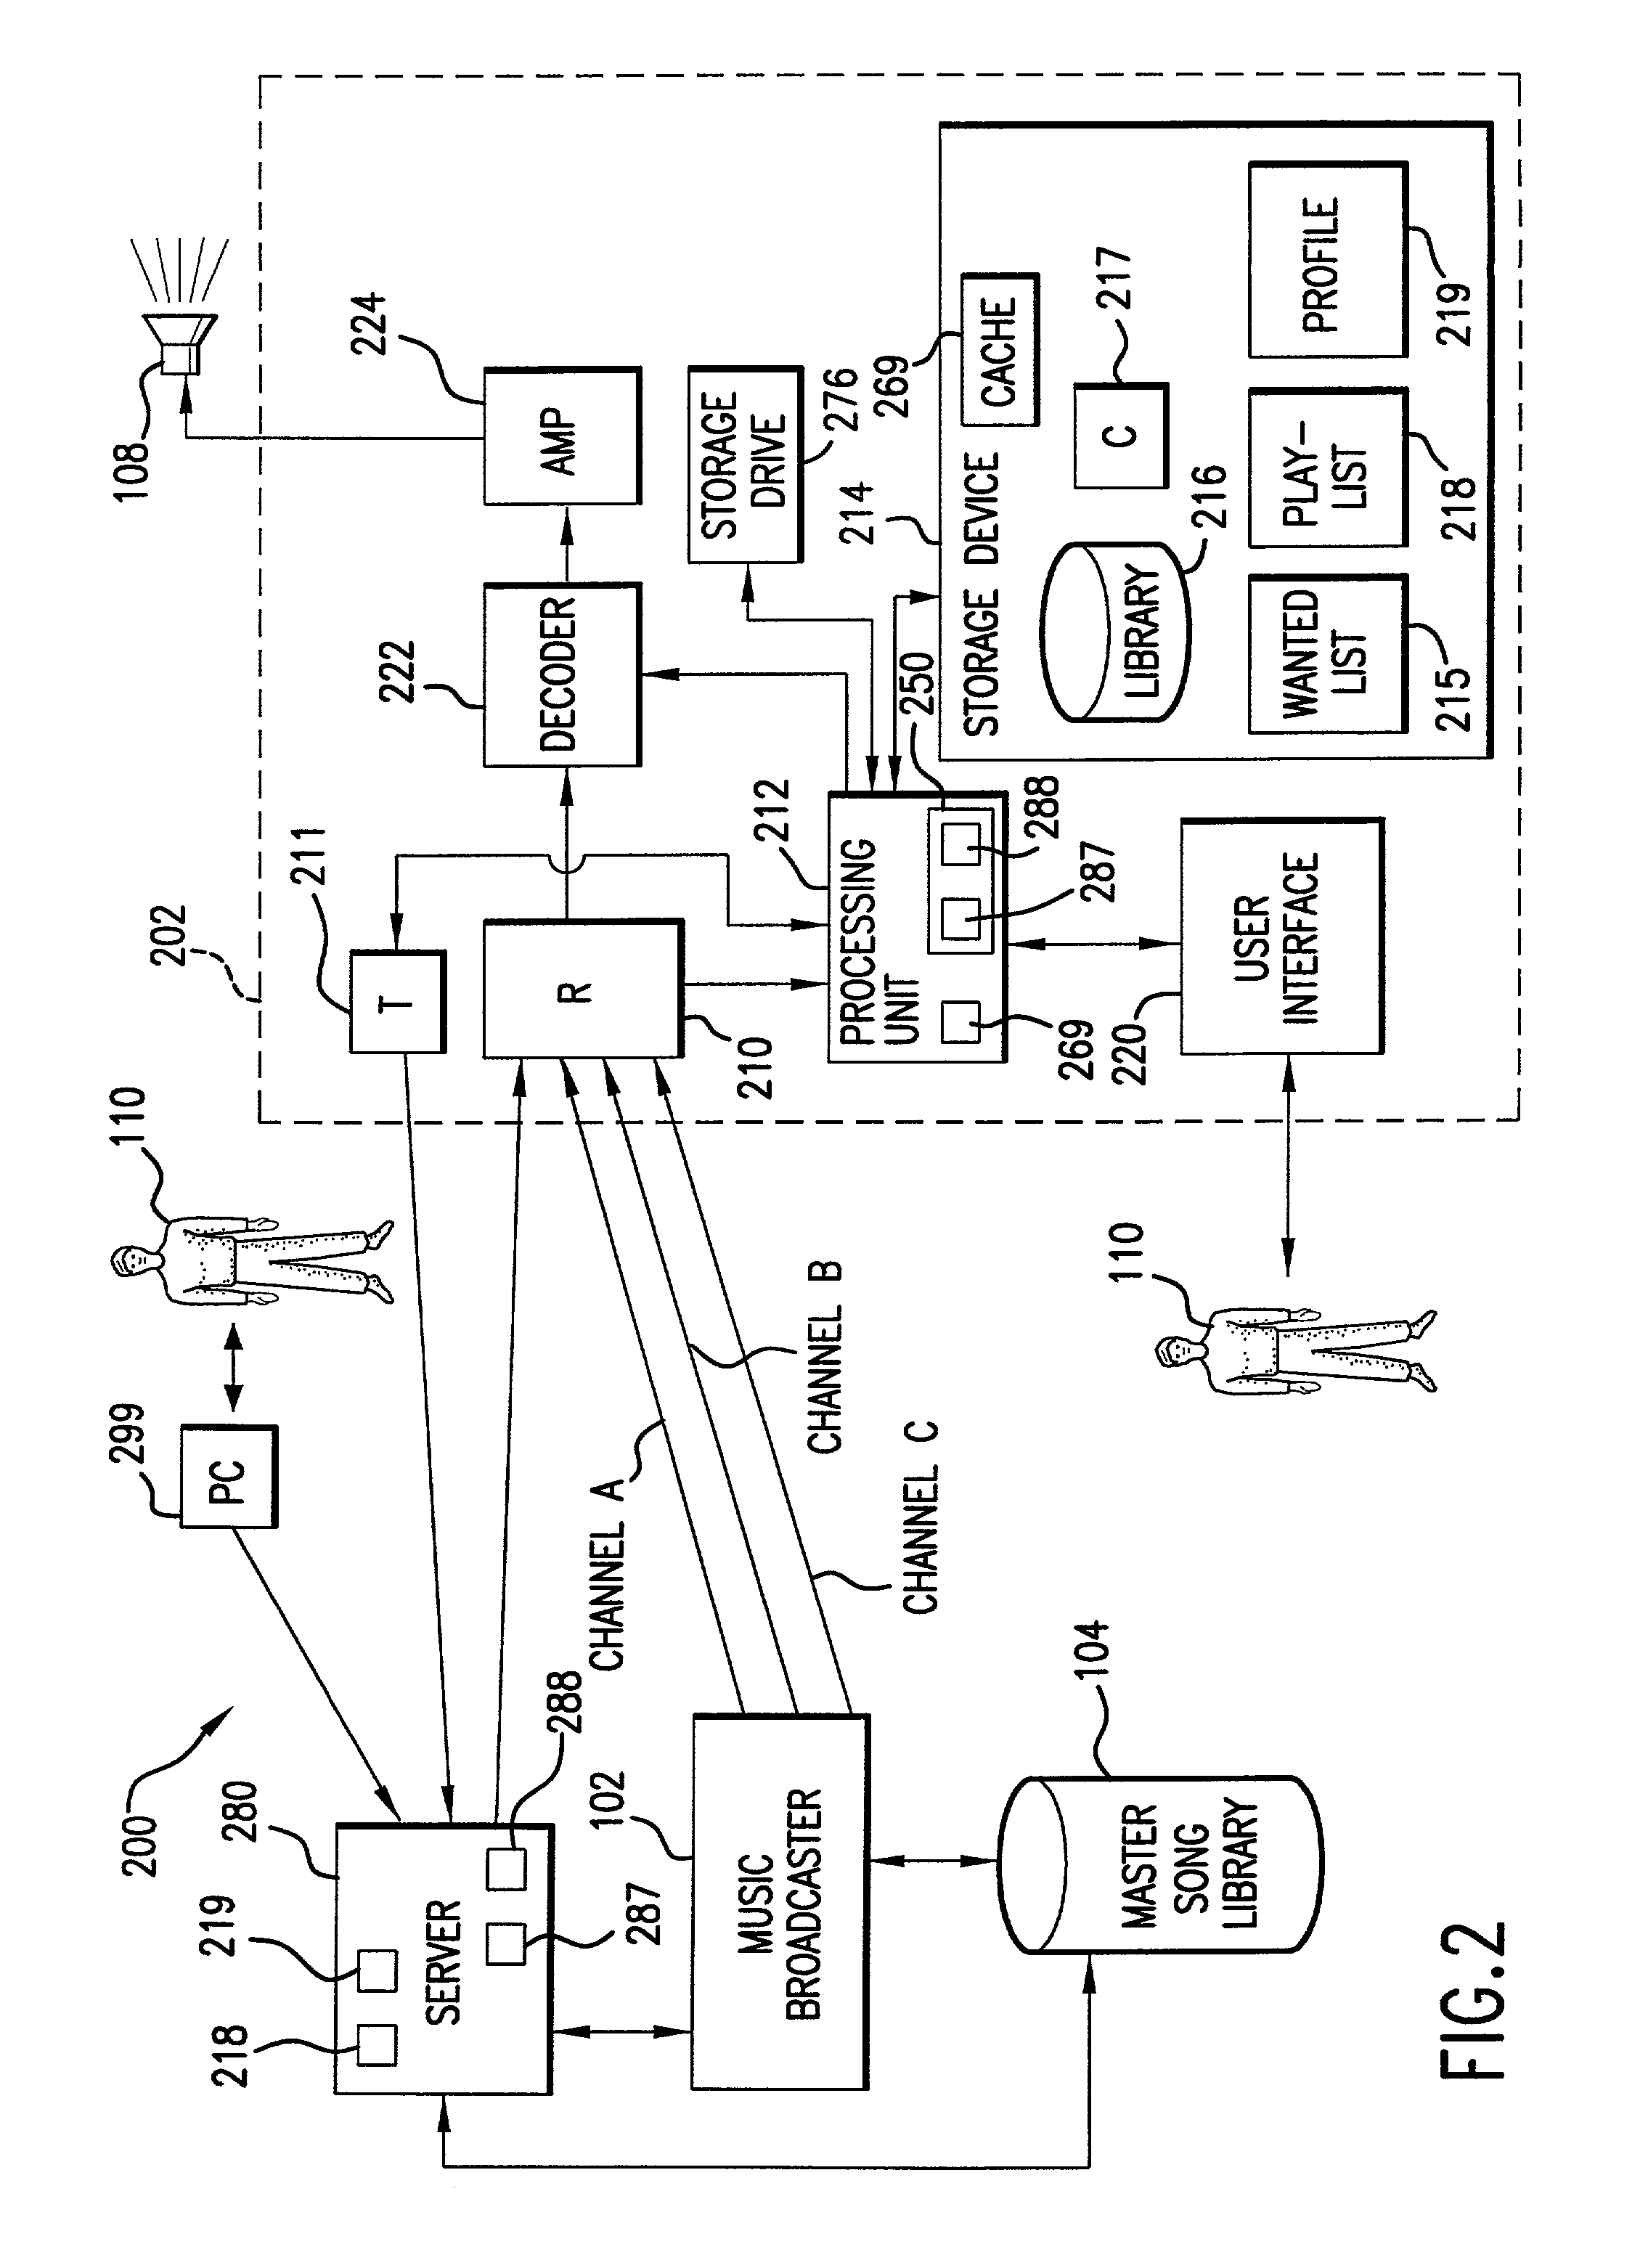 Personalized audio system and method